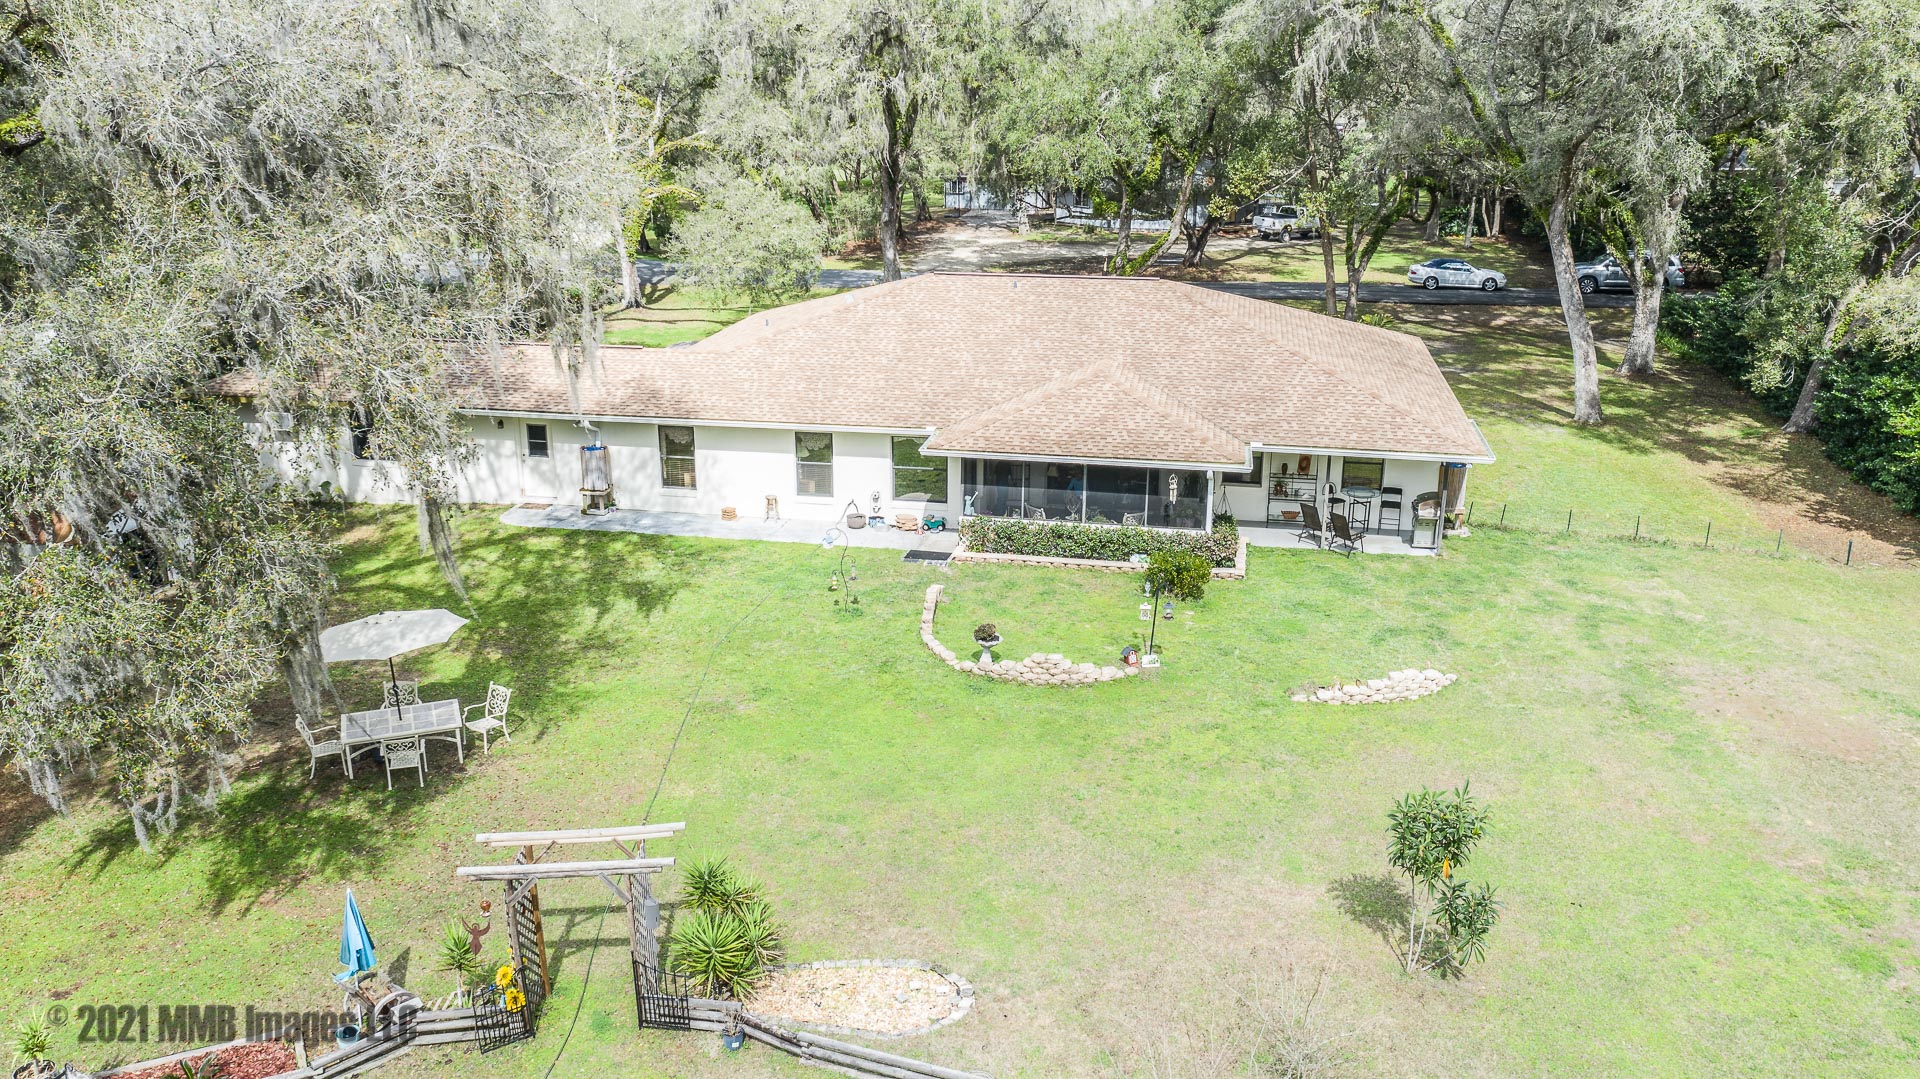 Real Estate Listing Photo for the Real Estate Home and Property for Sale on 1 Acre on 7121 E Manchester Ct. in the South Hampshire Subdivision of Floral City, Citrus County, Florida 34436